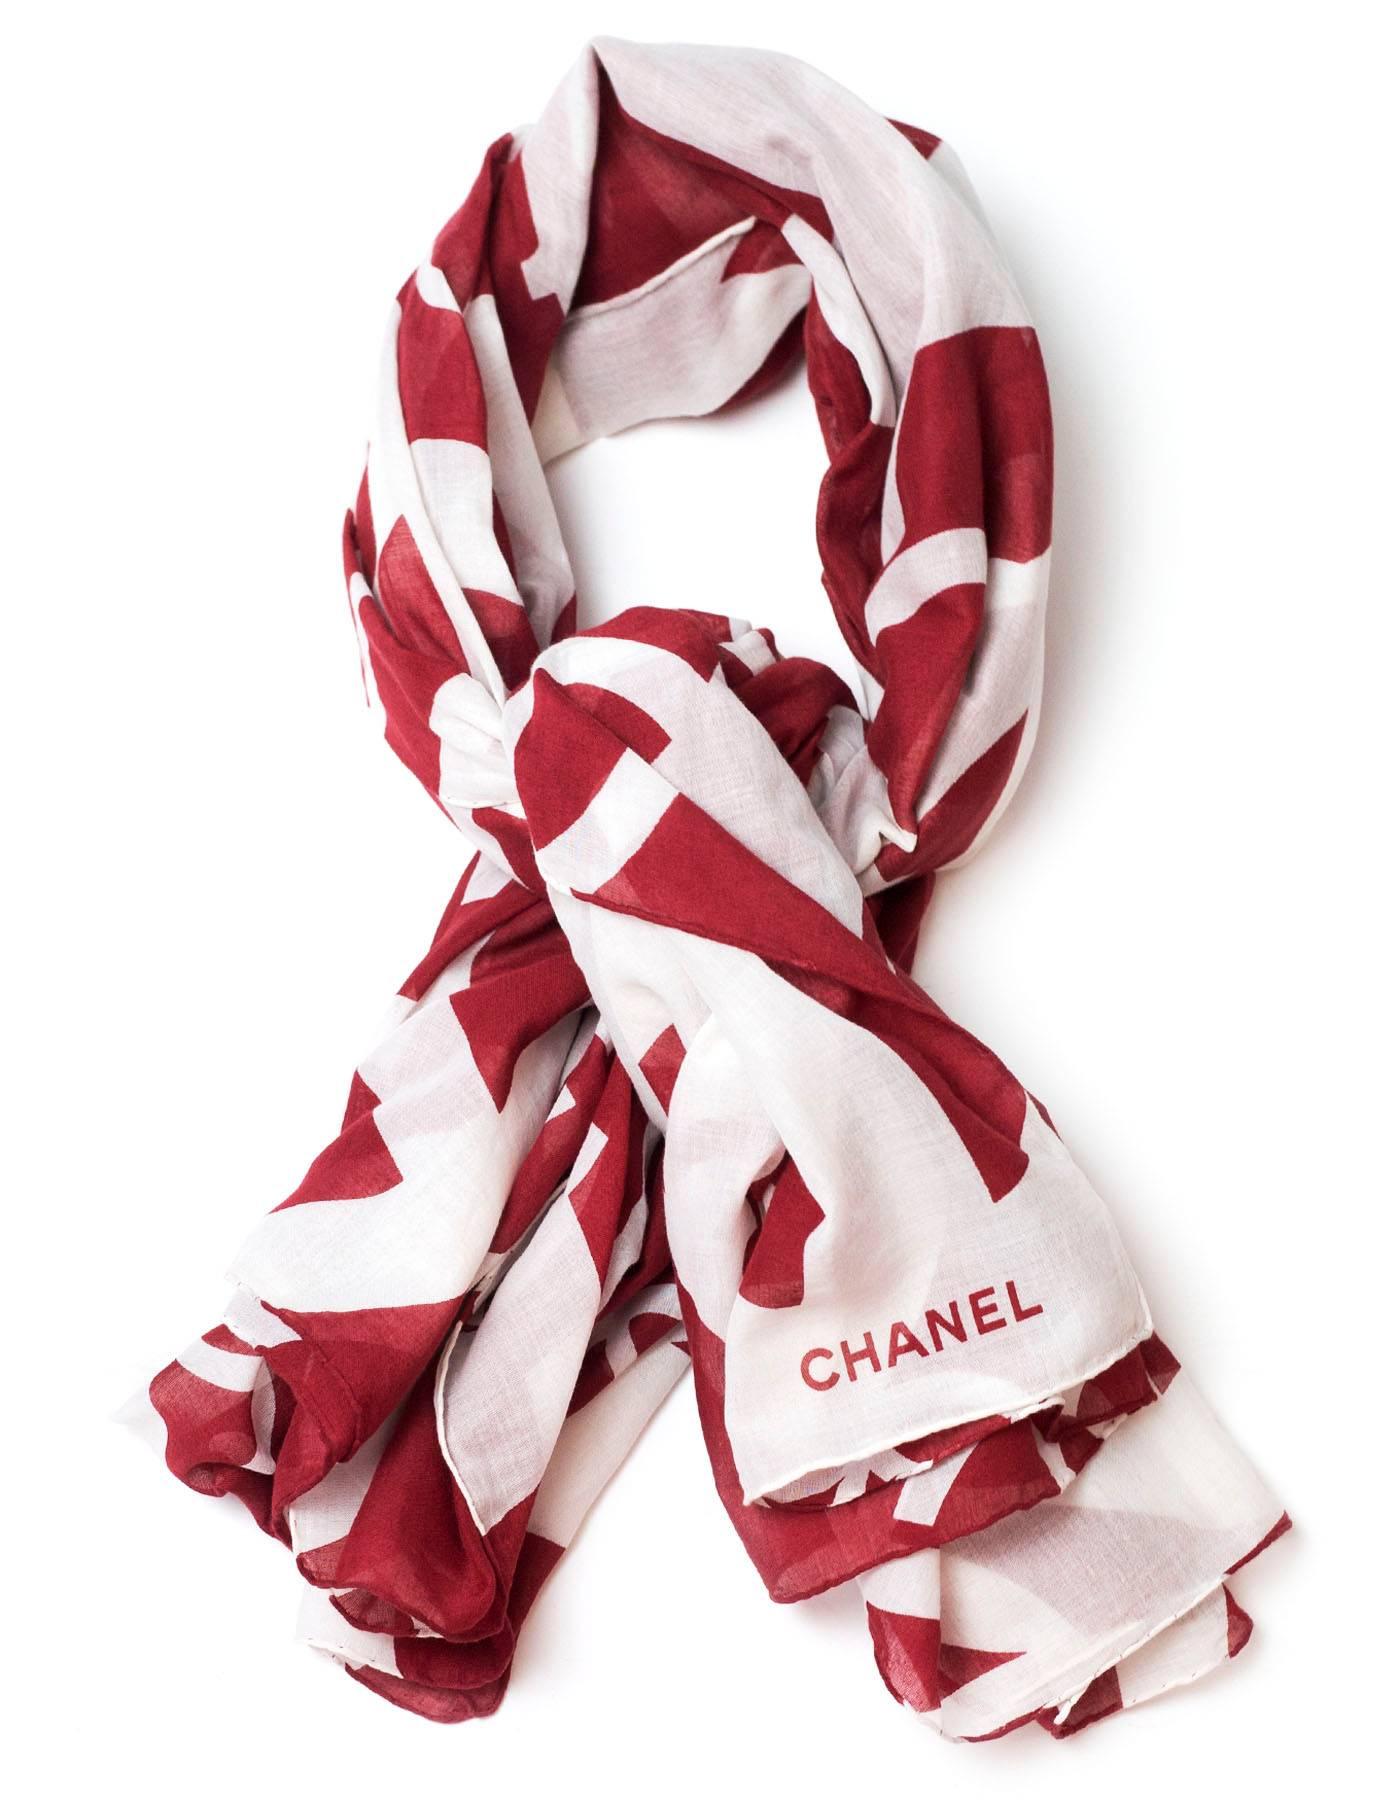 Chanel Red & White XL CC Scarf/Wrap

Made In: Italy
Color: Red, white
Composition: 100% cotton
Overall Condition: Very good pre-owned condition with the exception of some stains
Measurements:
Length: 60"
Width: 52"